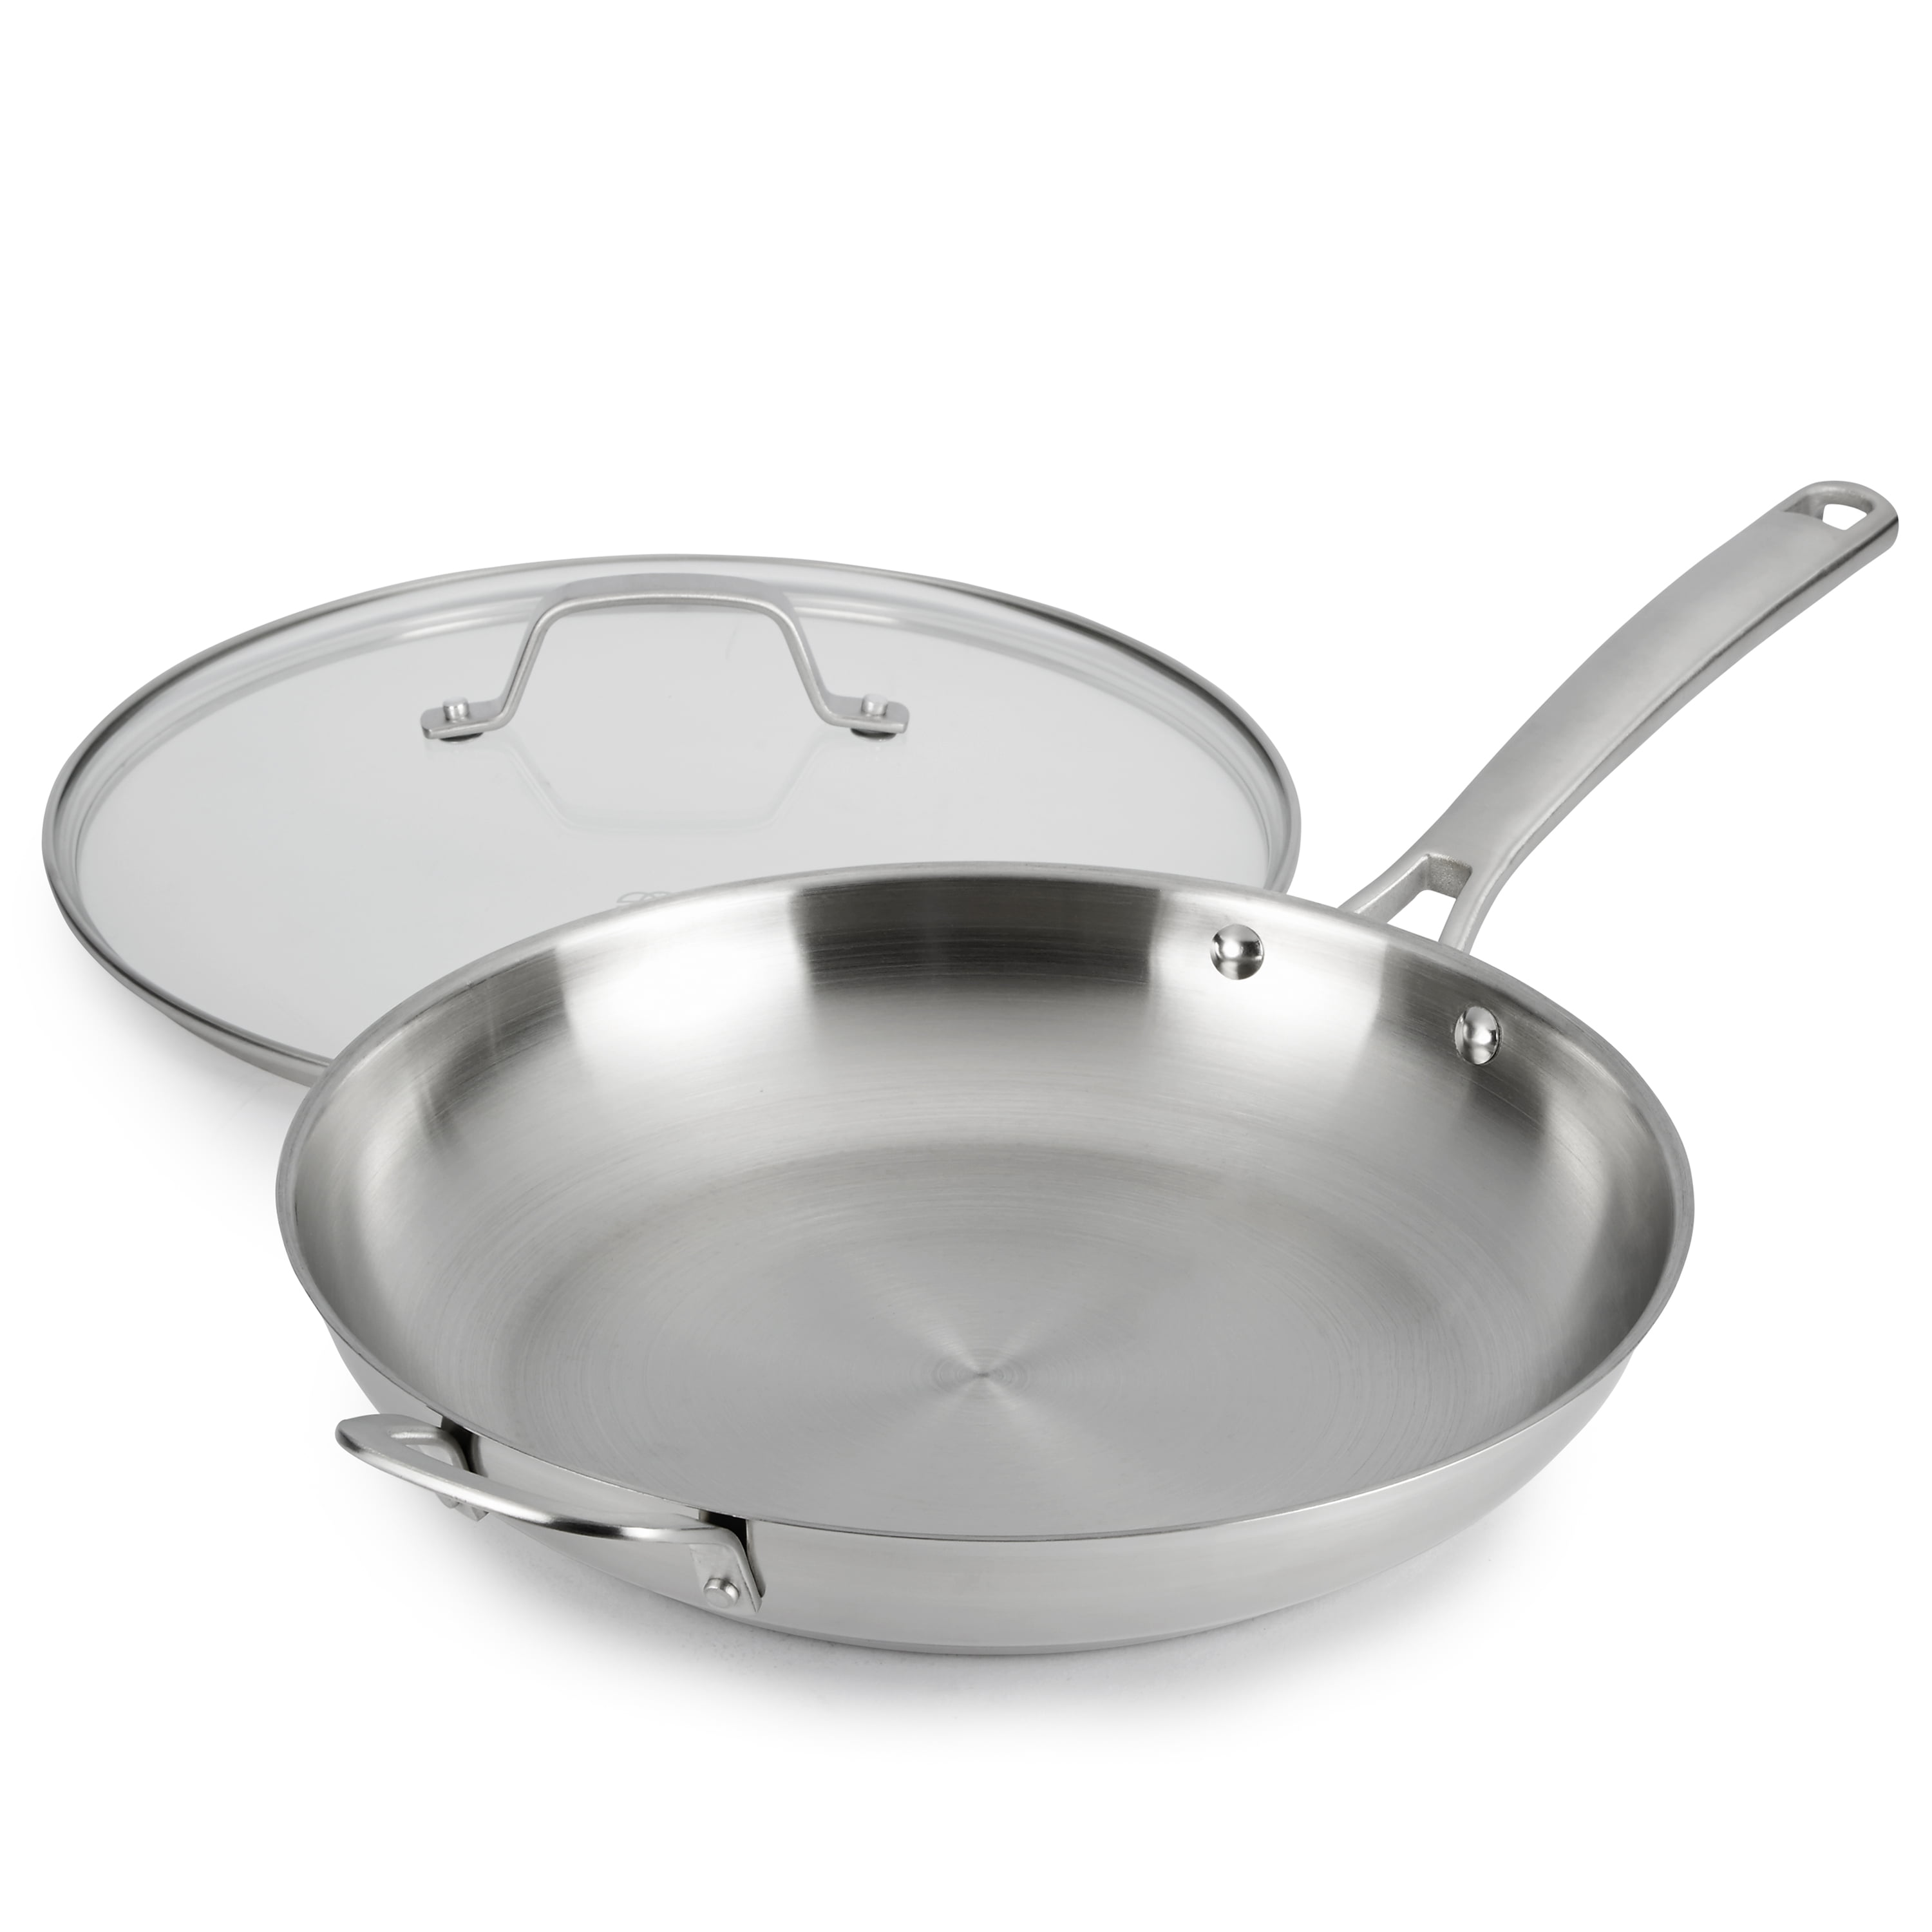 Calphalon Classic Stainless Steel 12-Inch Fry Pan, 1891247 - Walmart.com Calphalon 12 Inch Stainless Steel Skillet